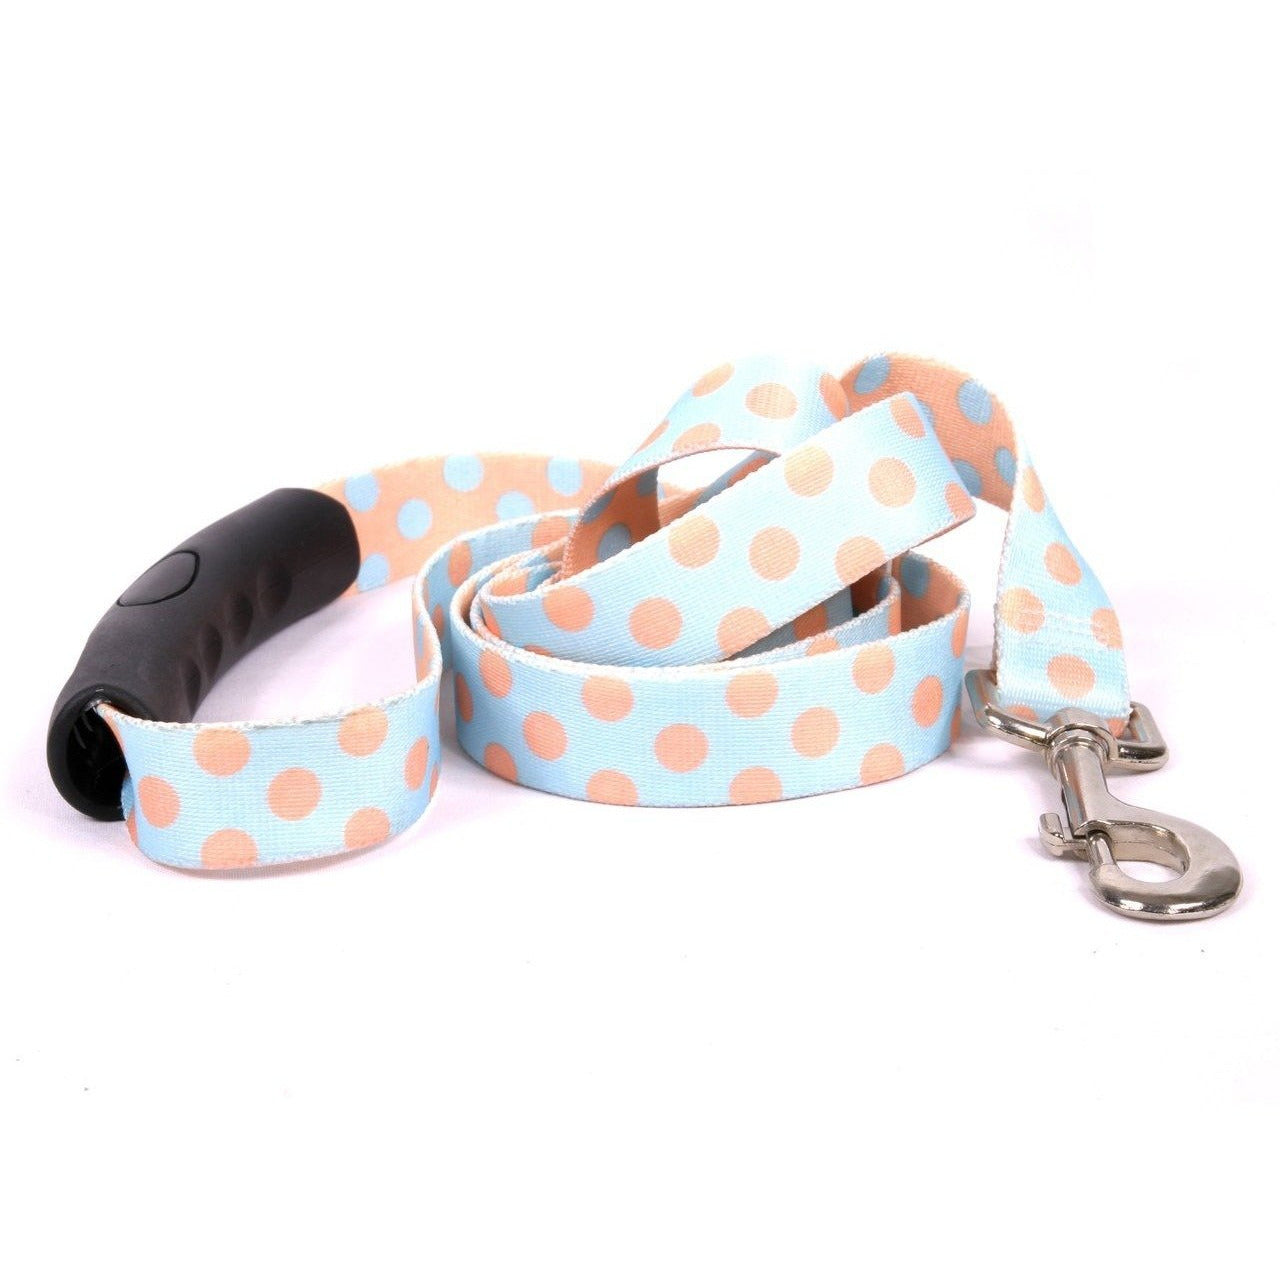 Skulls Coupler Dog Leash by Yellow Dog Design, Inc - Order Today at